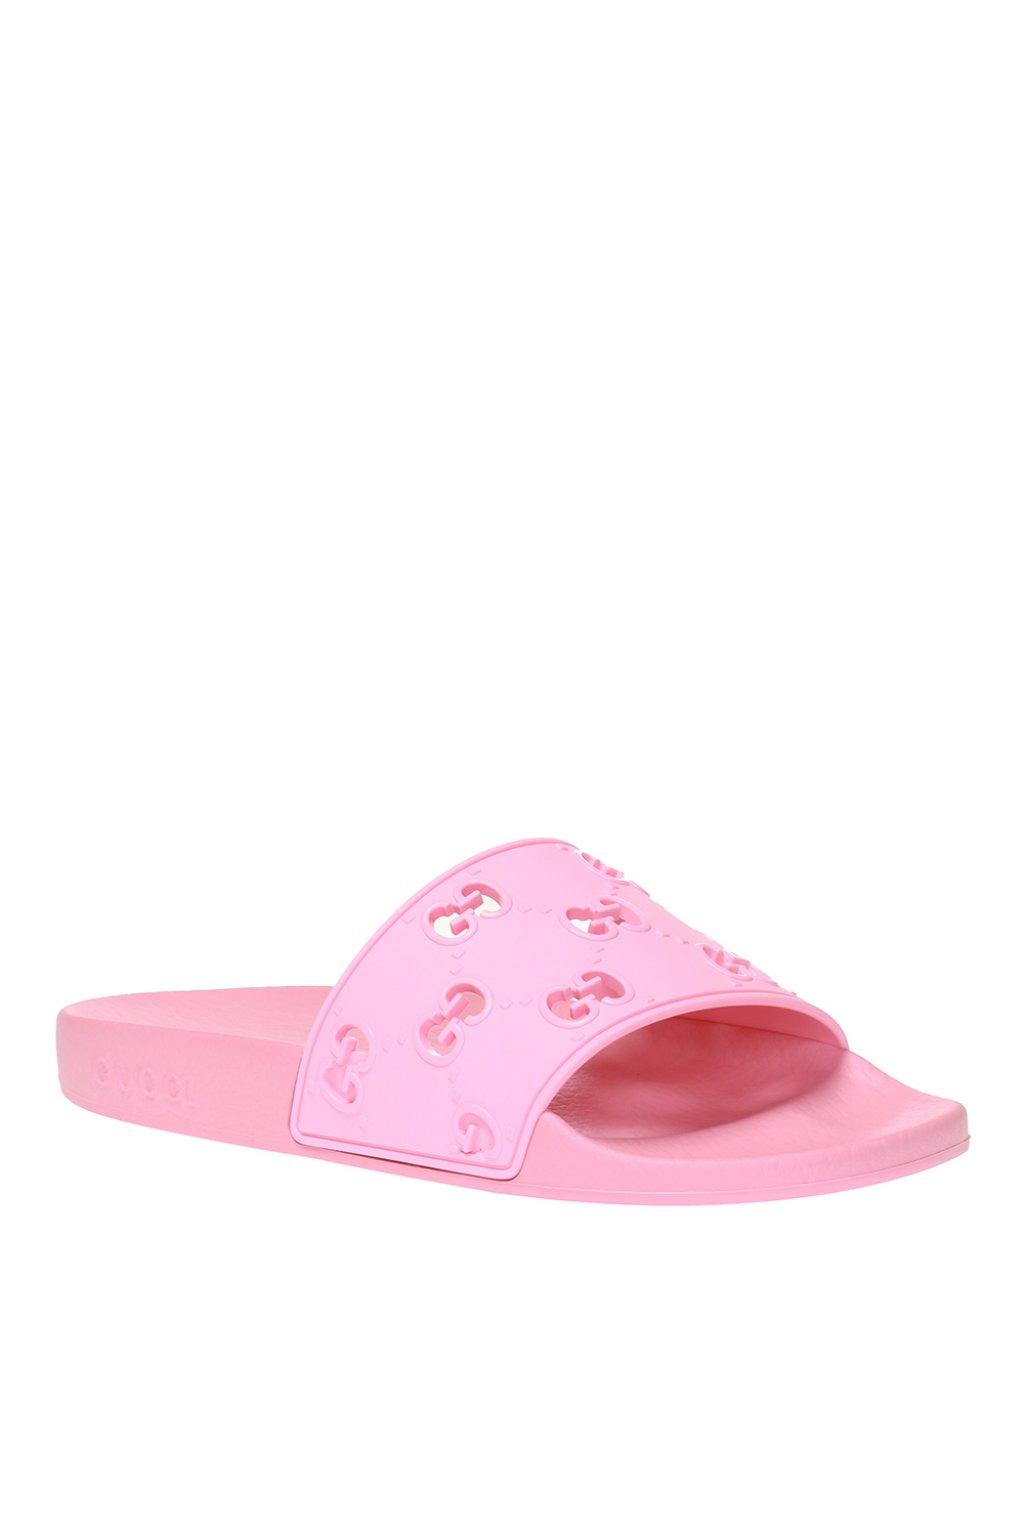 Gucci Rubber GG Slide Sandals in Pink - Save 3% - Lyst